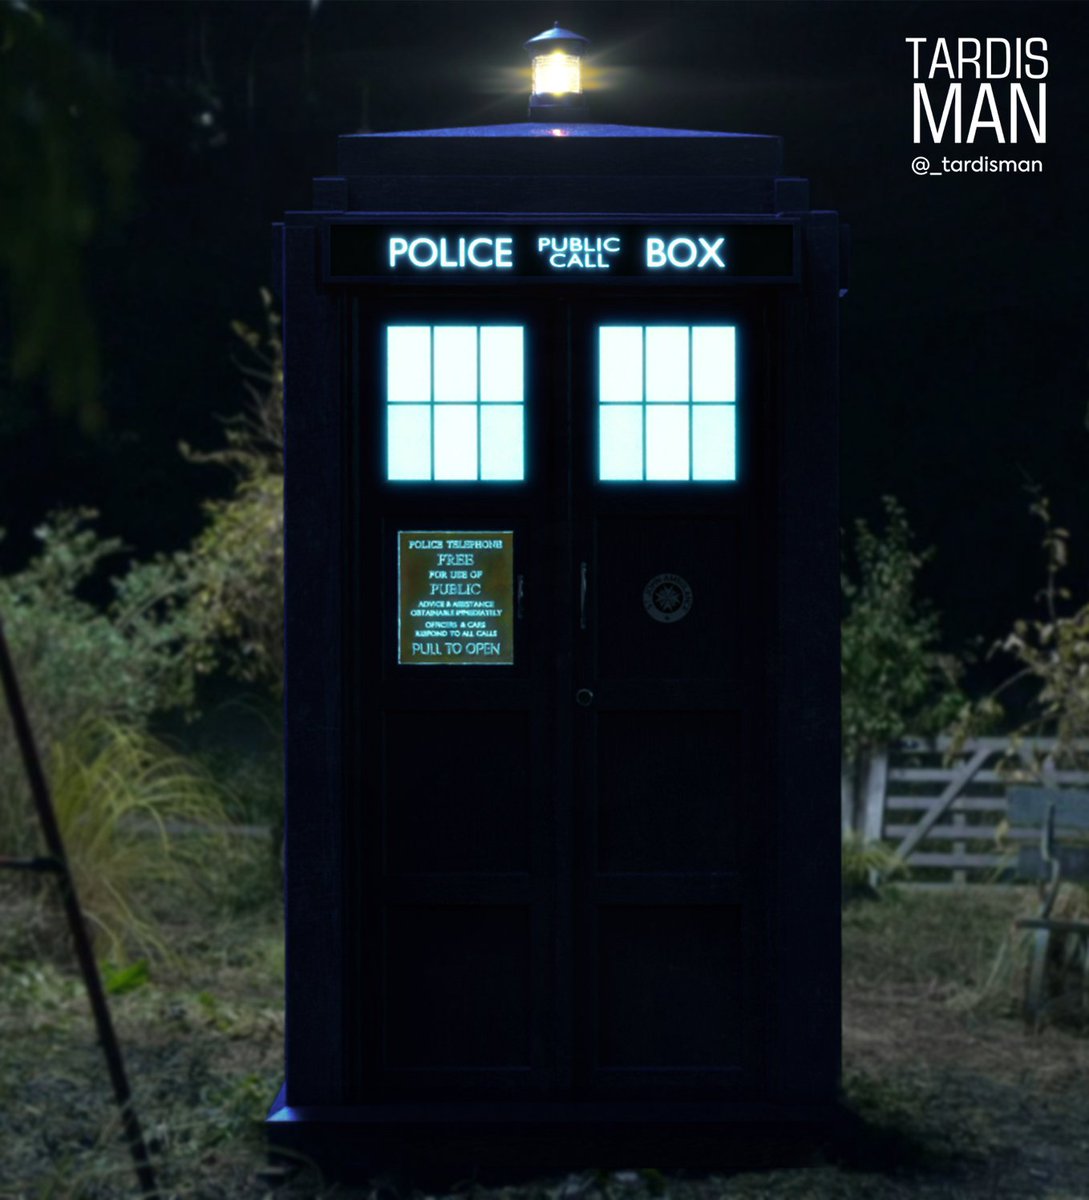 Another compositon with my box over a scene the ending of The Eleventh Hour  

Enjoy folks

#DoctorWhoFlux #DoctorWho #TARDIS #3dmodeling #Photoshop #Keyshot #photoshopediting #MattSmith #11thDoctor #TheEleventhHour